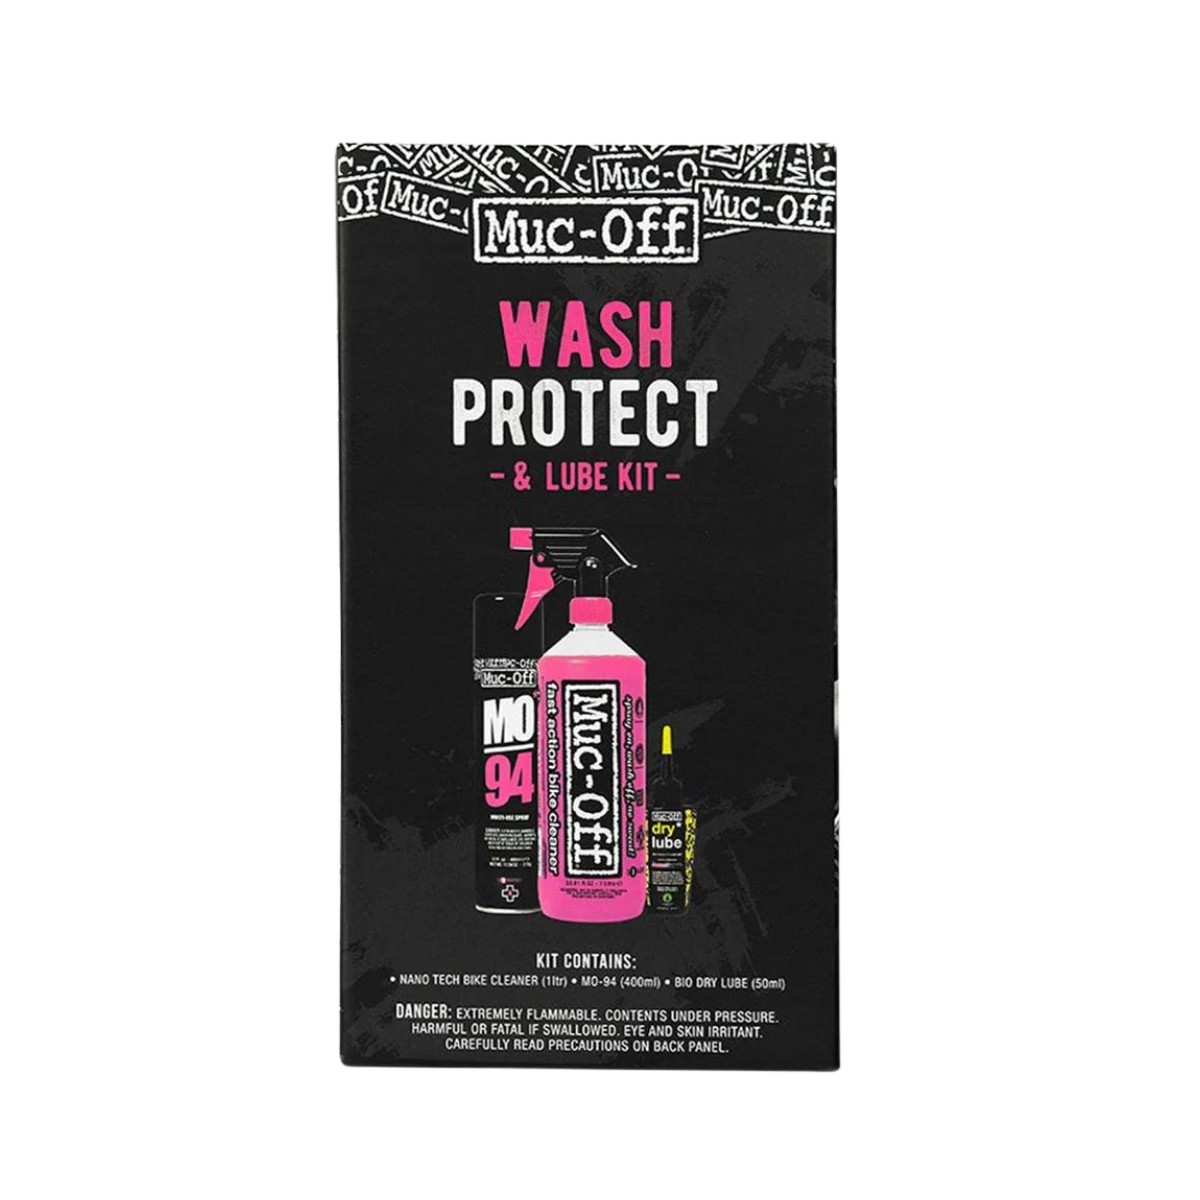 MUC-OFF WASH PROTECT AND LUBE (DRY) chain oil